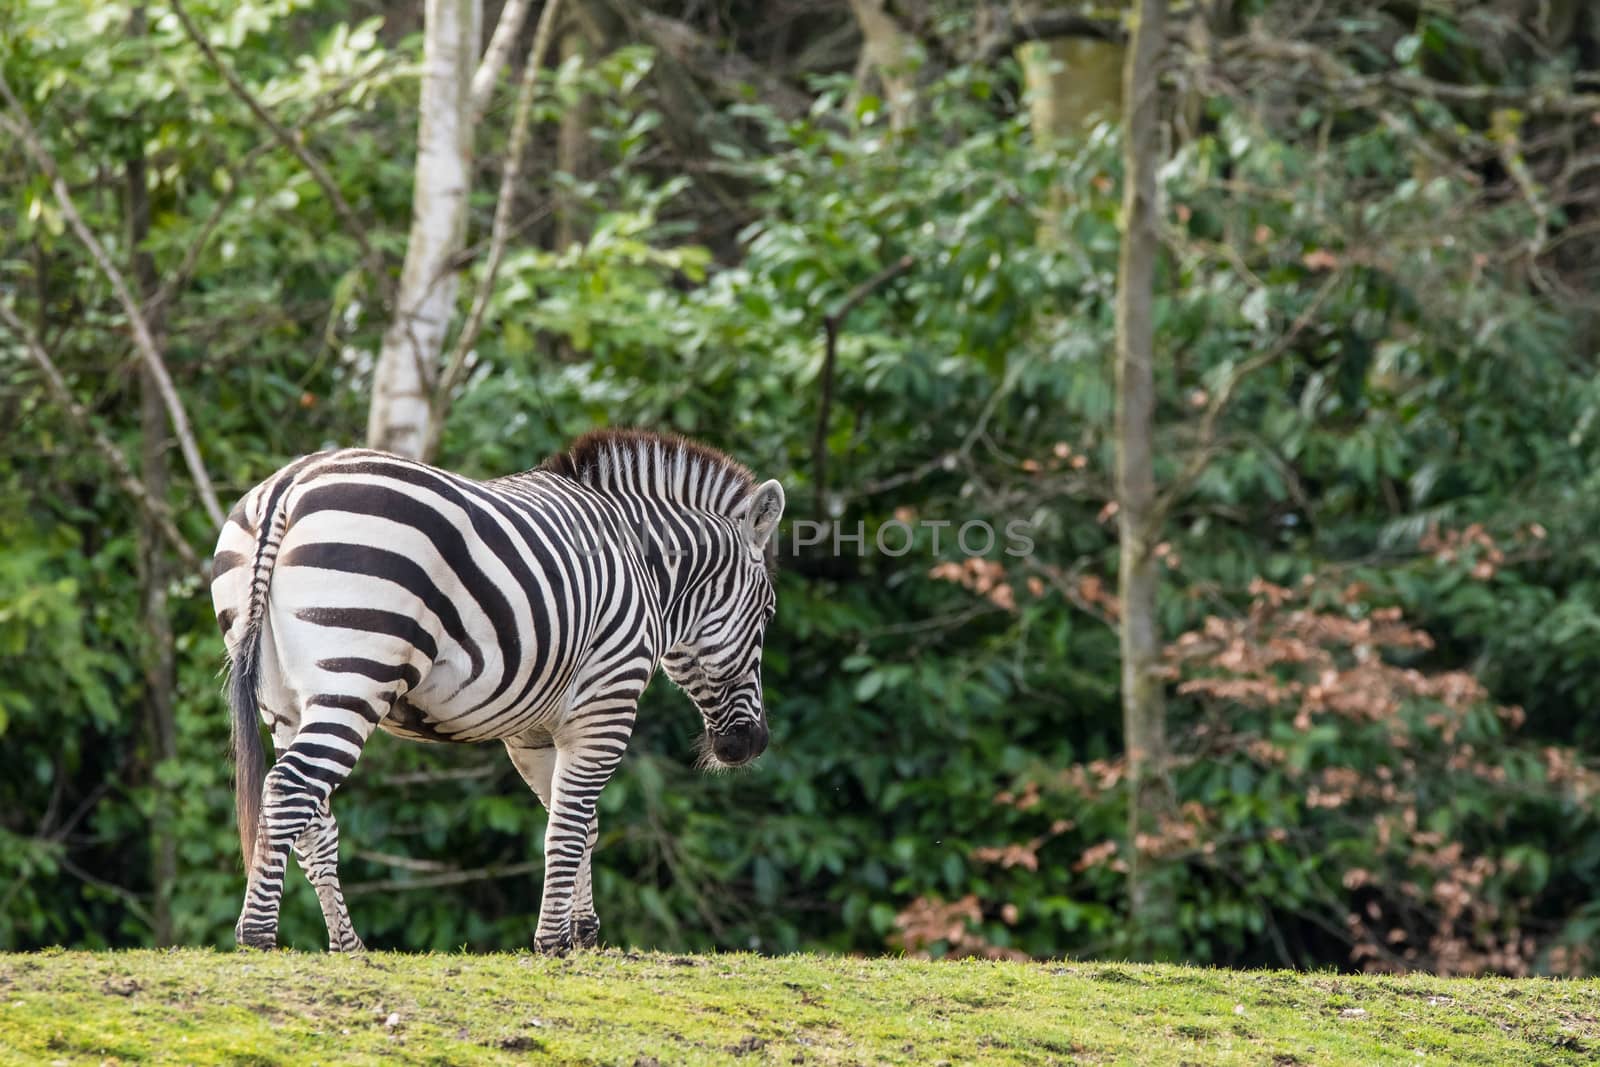 Zebra at Zoo by cestes001